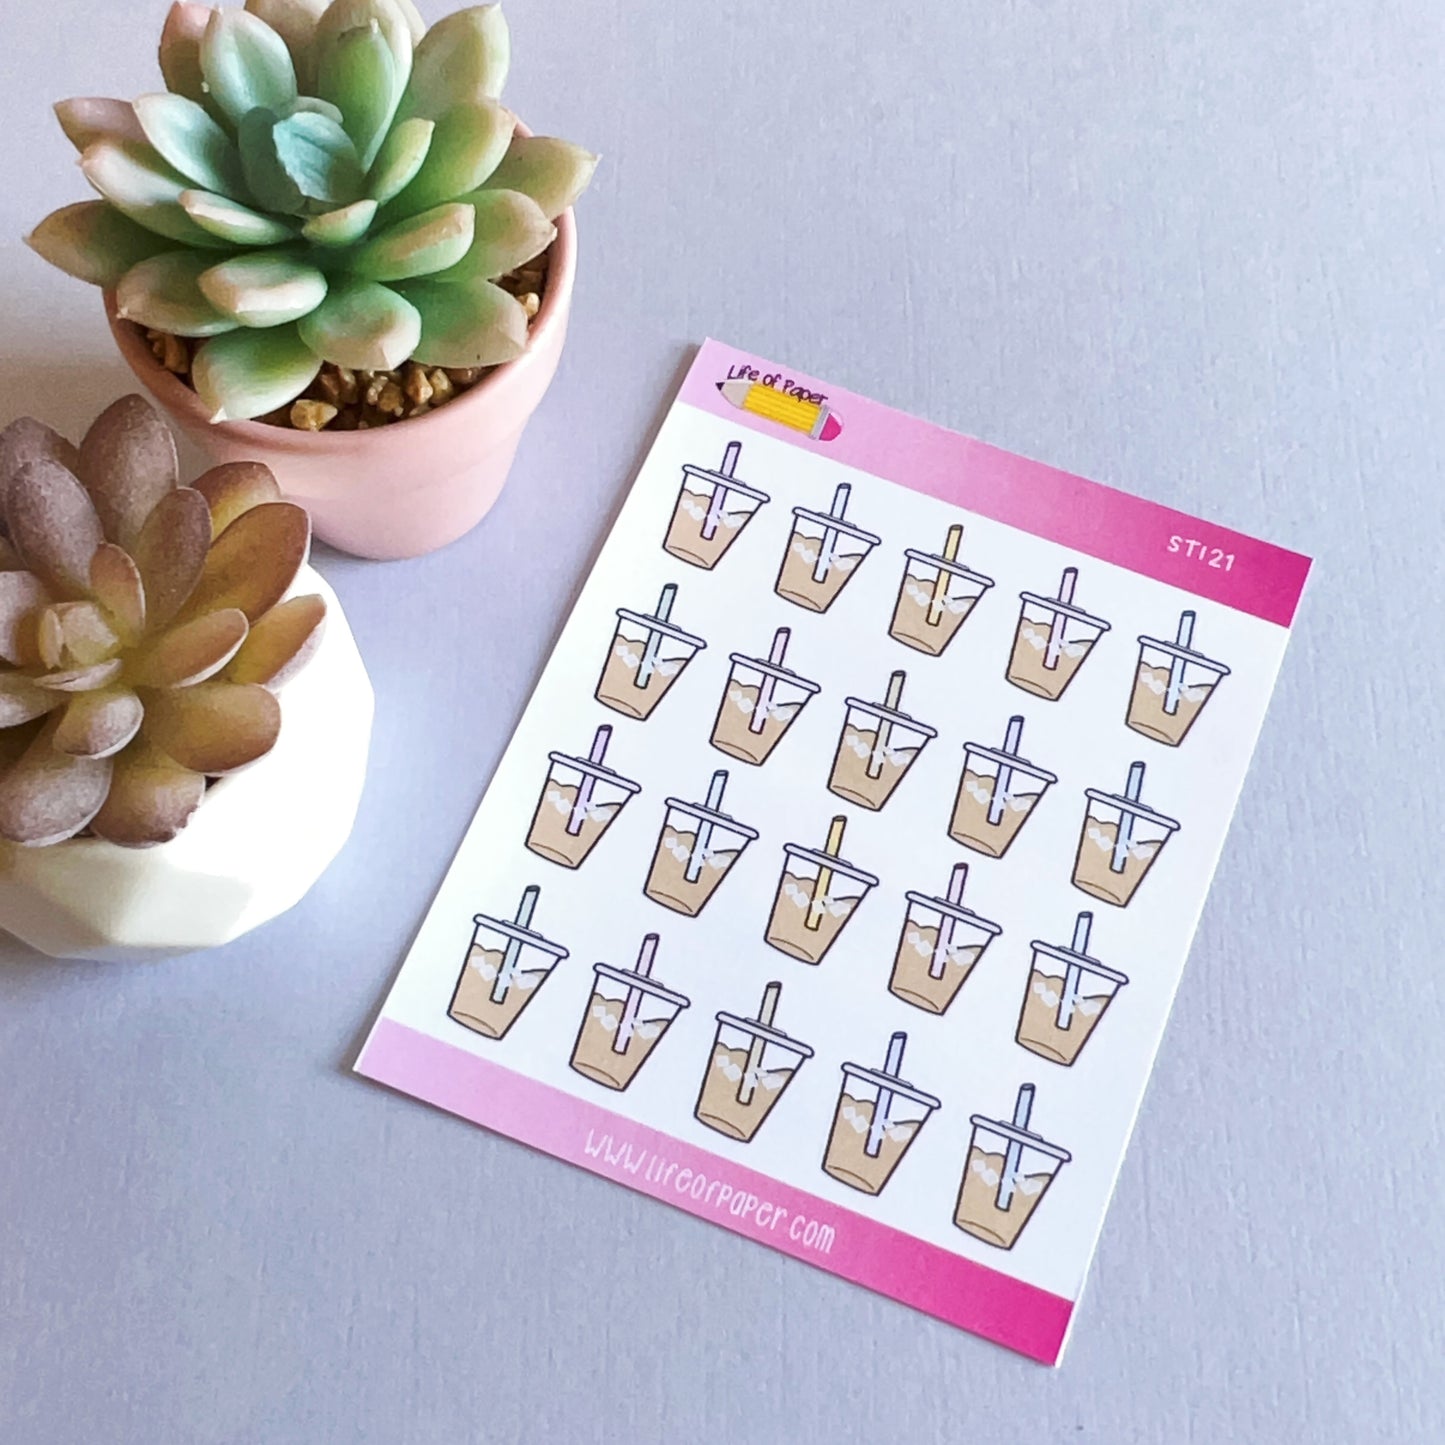 A sheet of Iced Coffee Planner Stickers featuring cartoon bubble tea cups with blue straws on a light purple background. Two small succulent plants in pots are placed on the left side of the sheet, evoking summer cold drinks. The sheet has a pink border at the top and bottom.